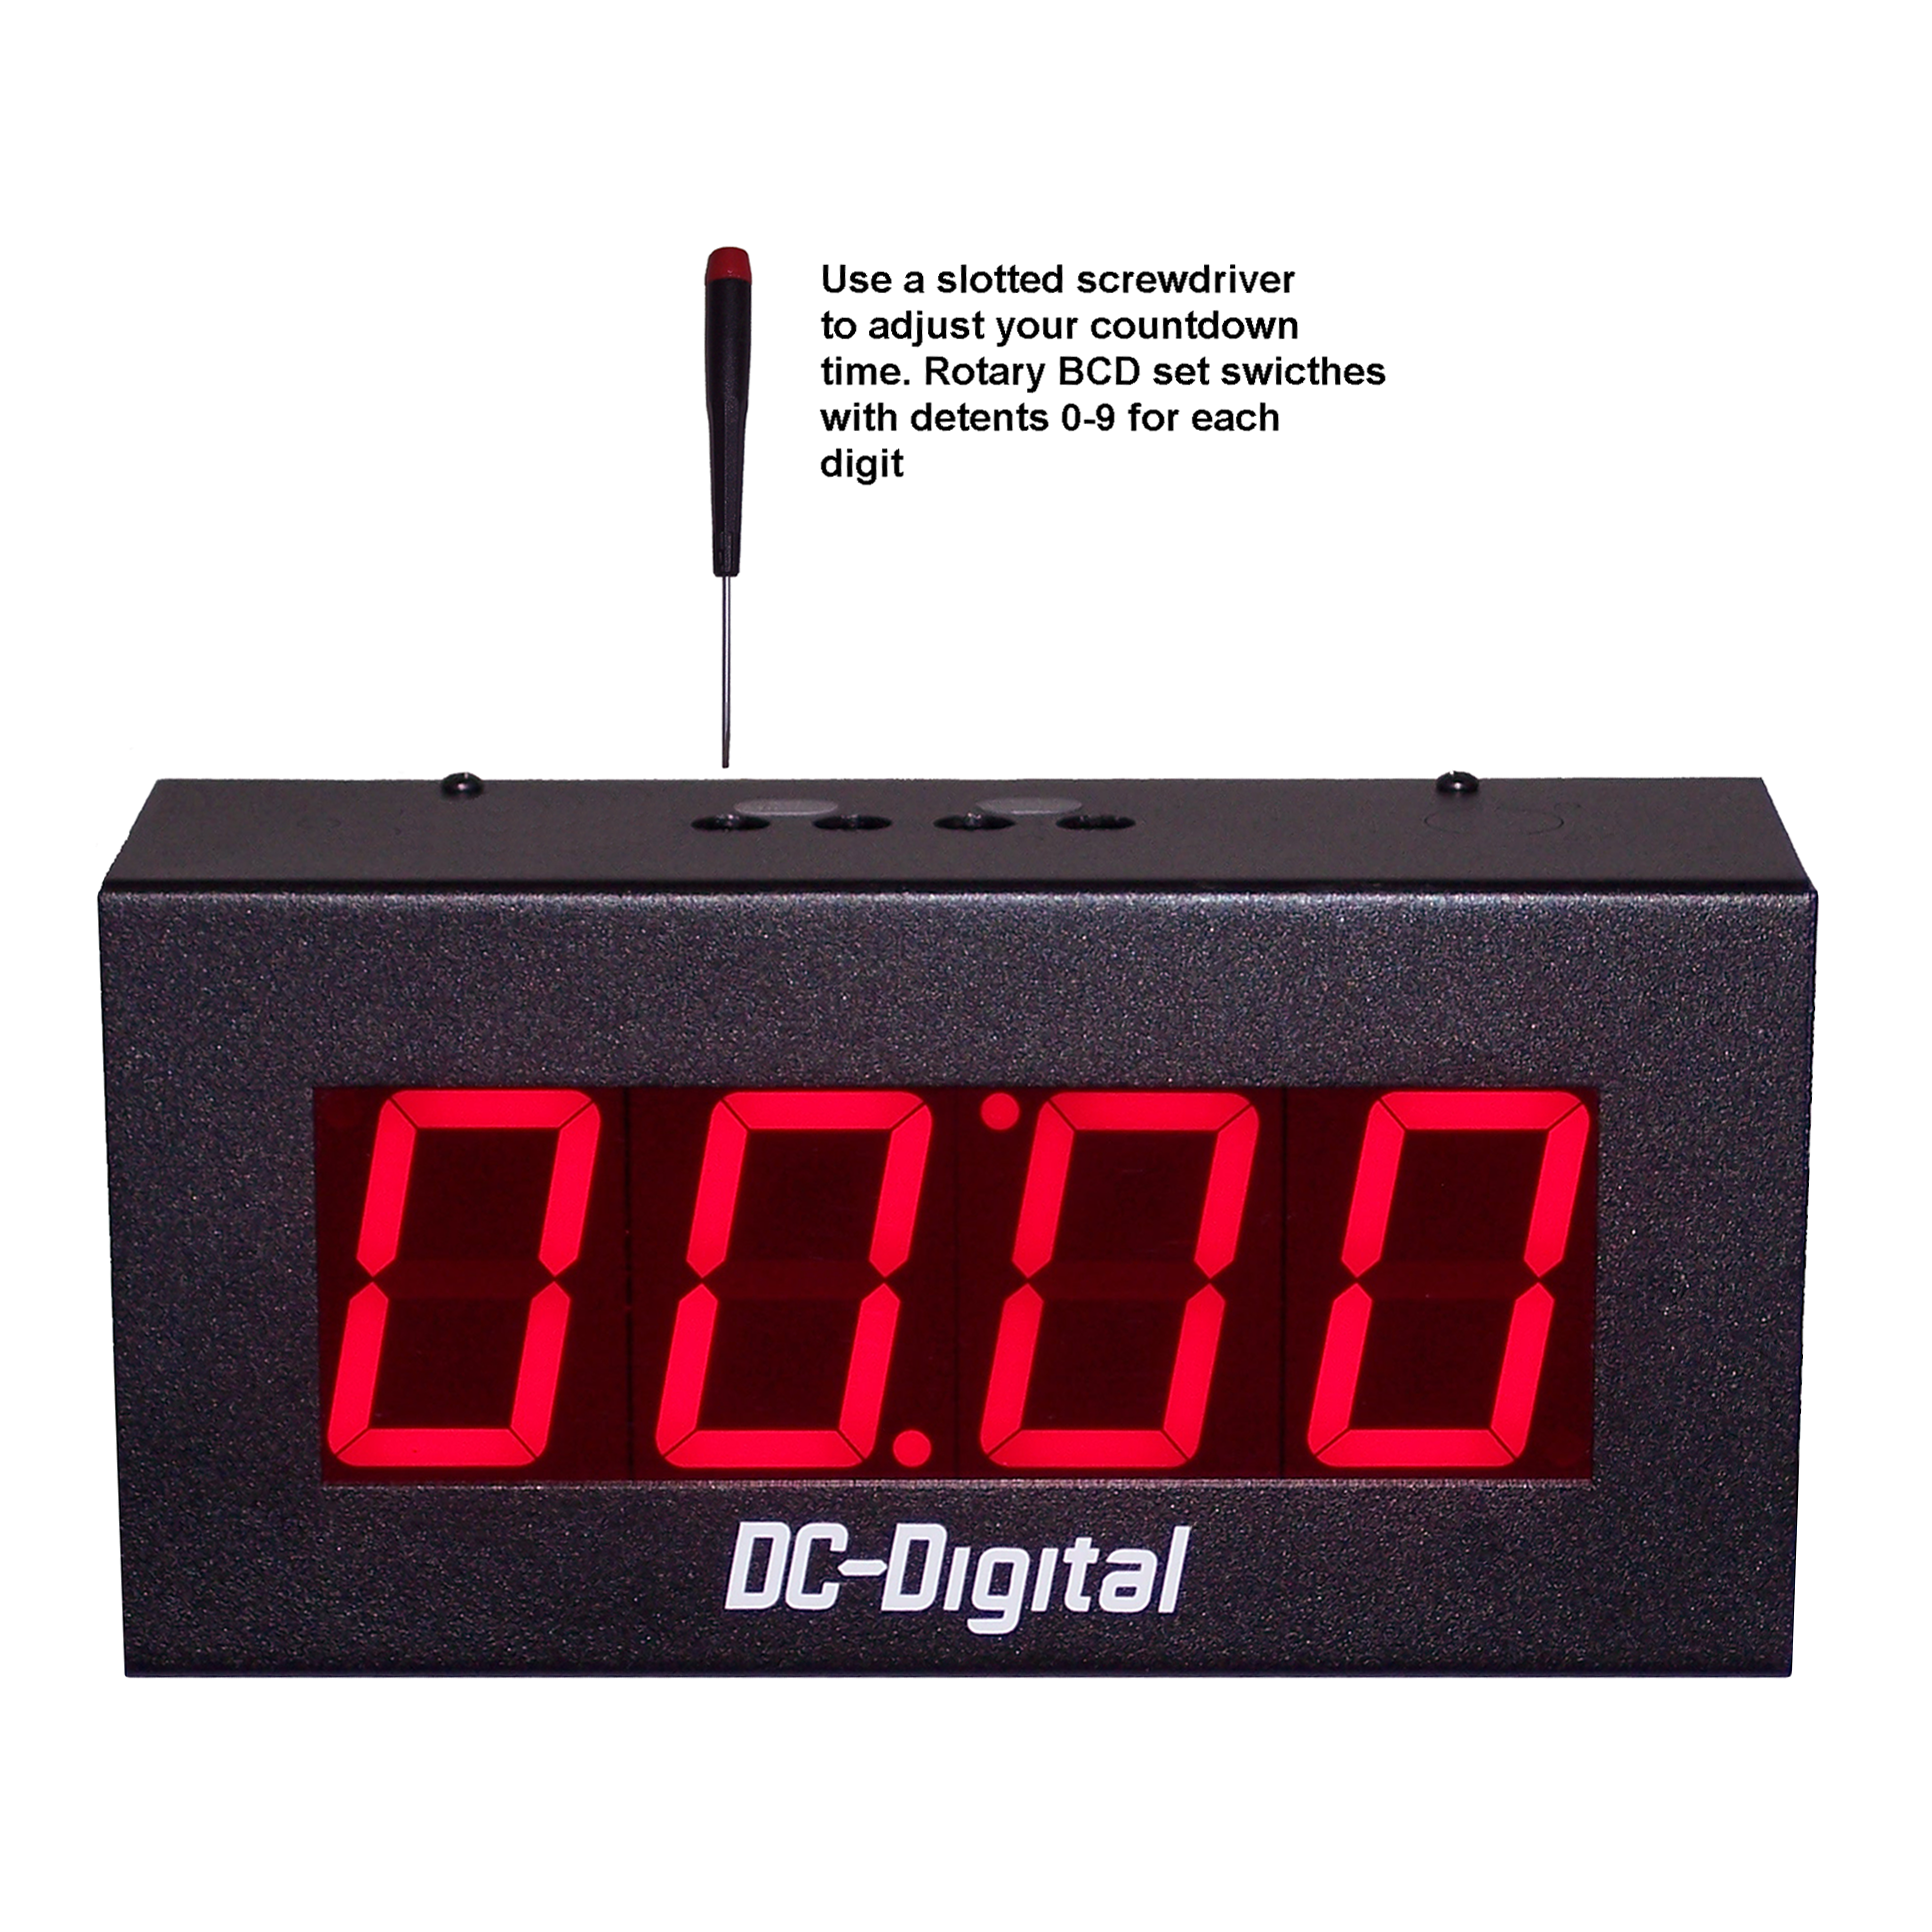 (DC-25T-DN-BCD) 2.3 Inch LED Digital, BCD Rotary Switch Set, Multi-Input (PLC-Relay-Switch-Sensor) Controlled, Countdown Timer-Clock